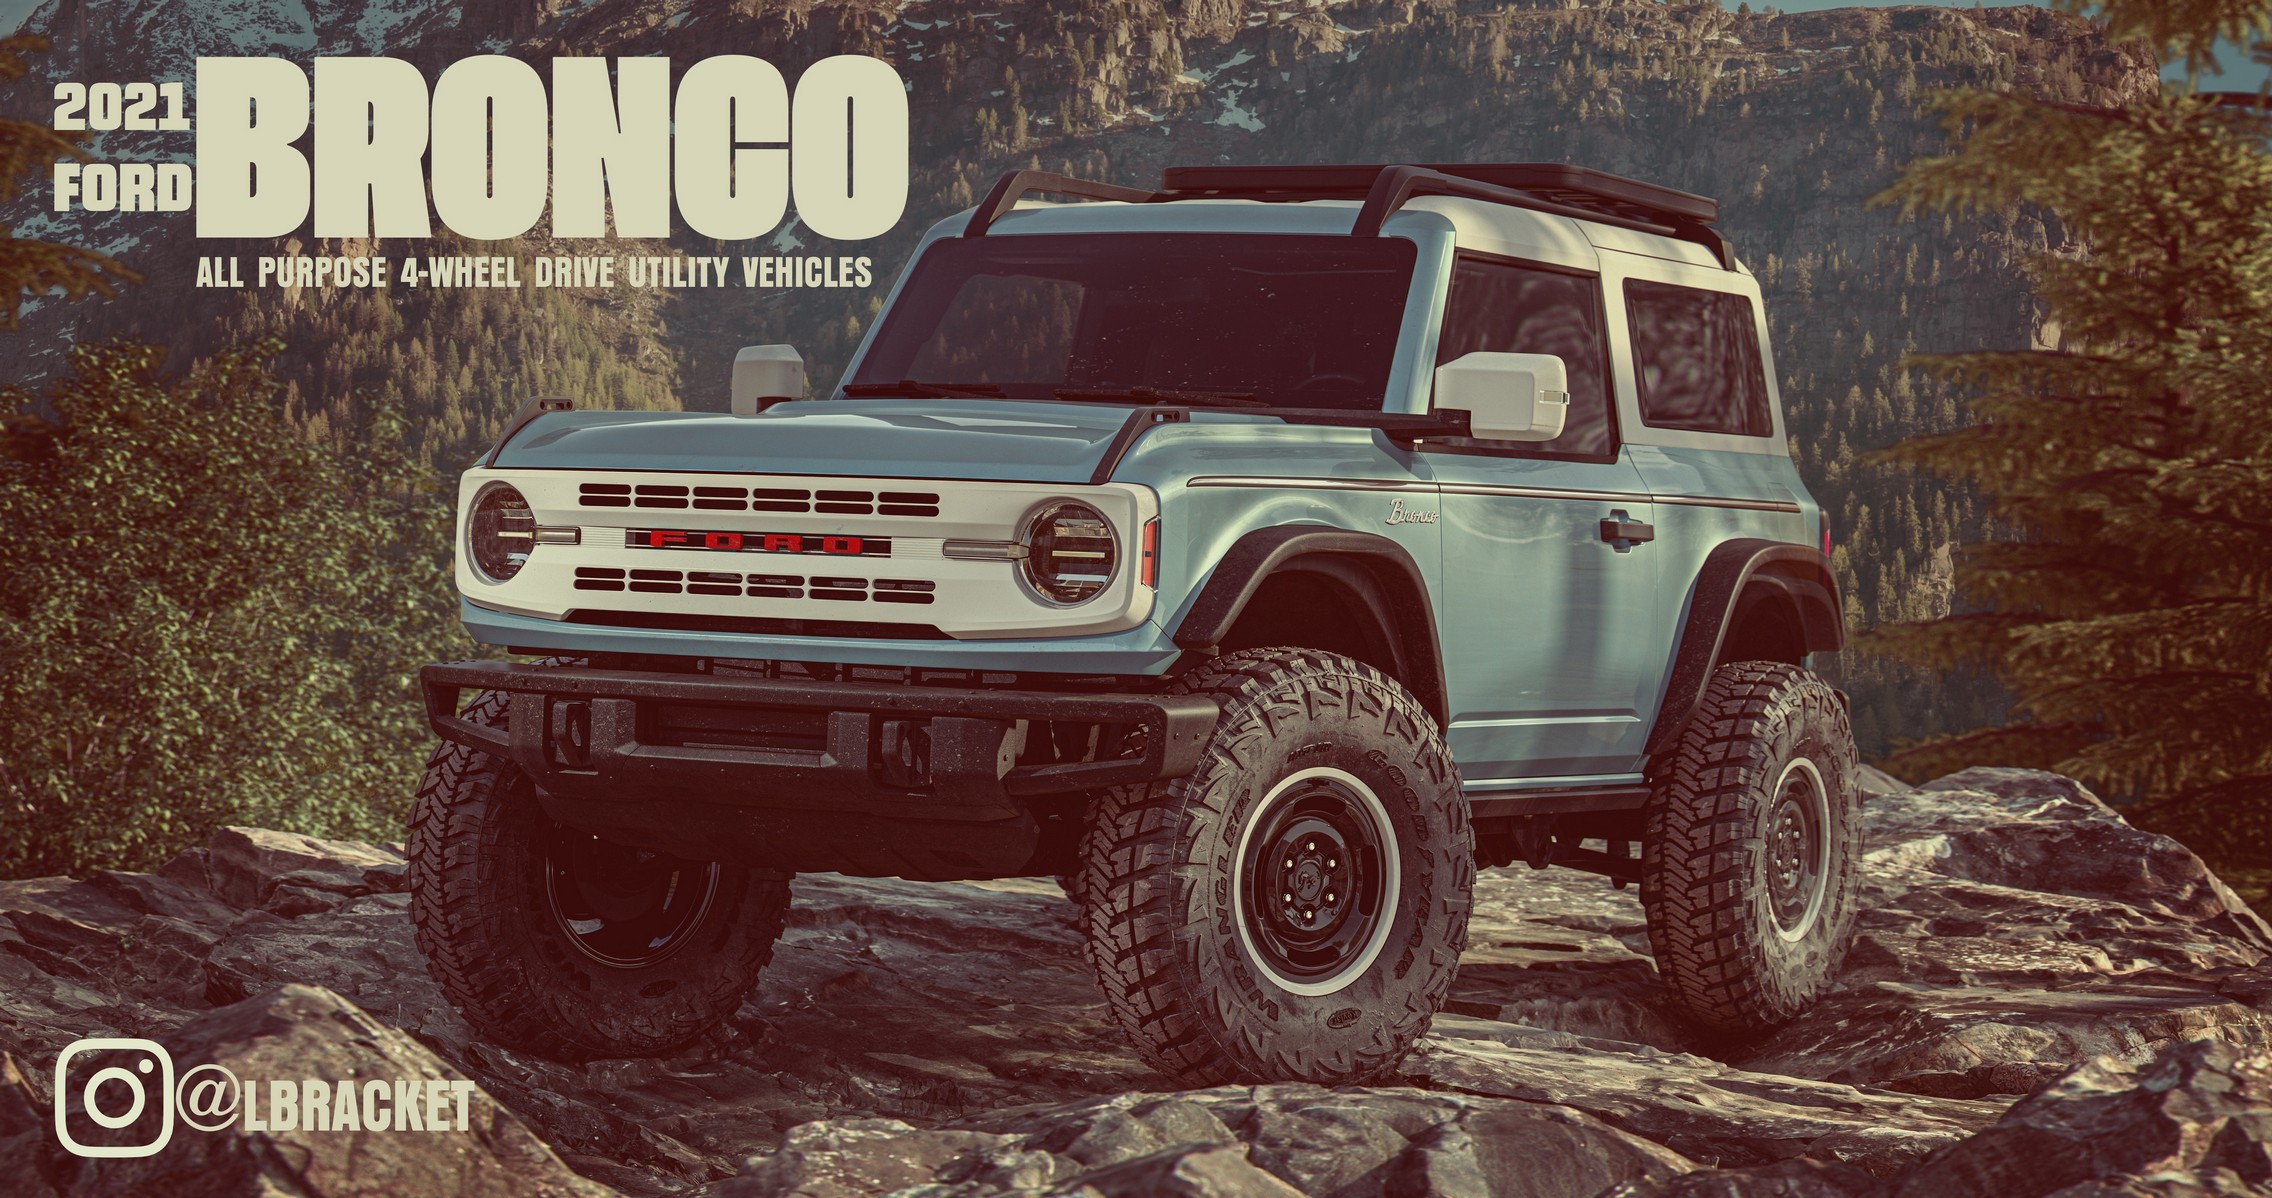 here-s-john-bronco-virtually-announcing-the-2021-ford-bronco-heritage-edition_3.jpg